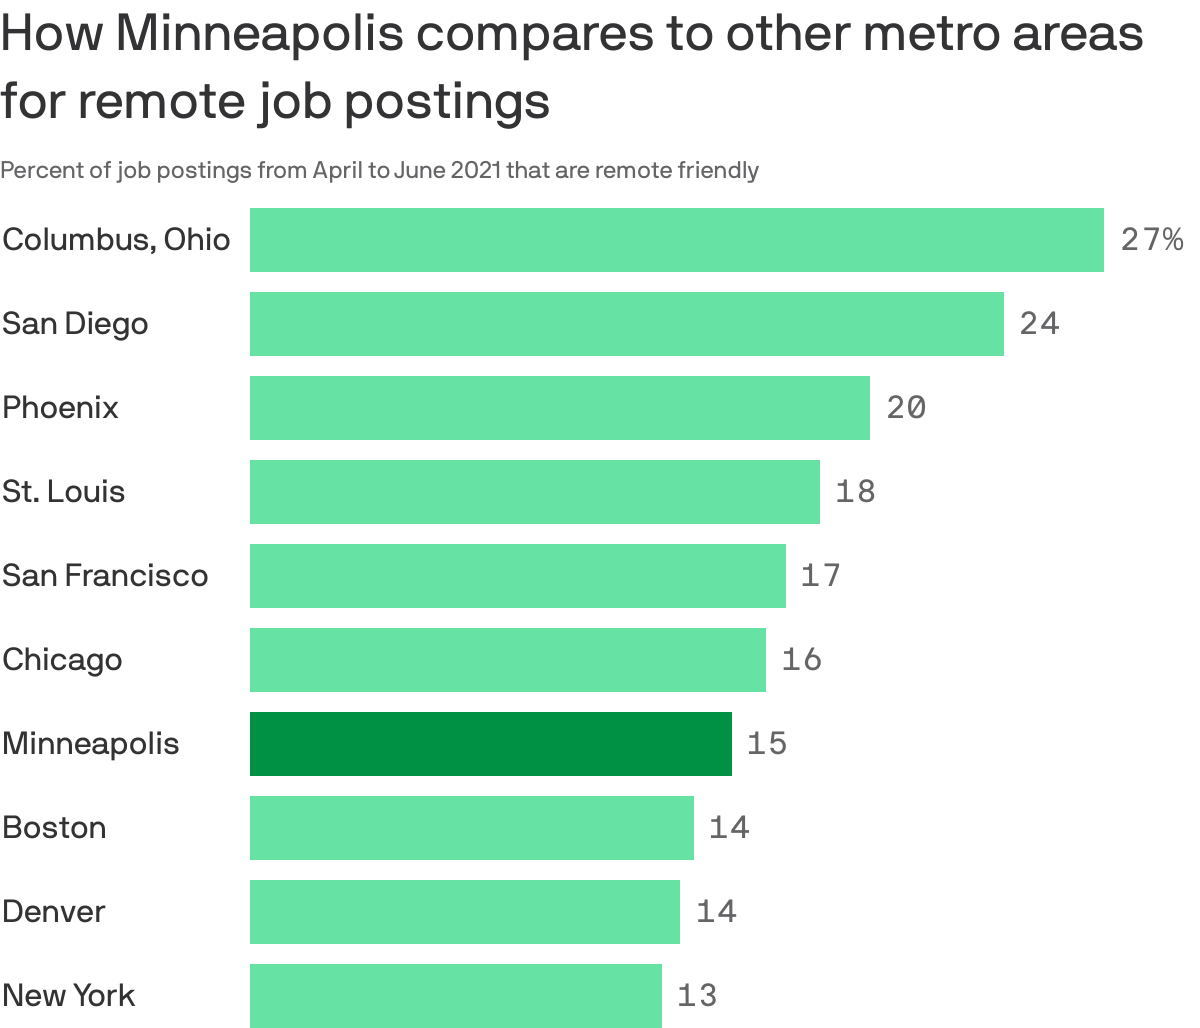 How Minneapolis compares to other metro areas for remote job postings